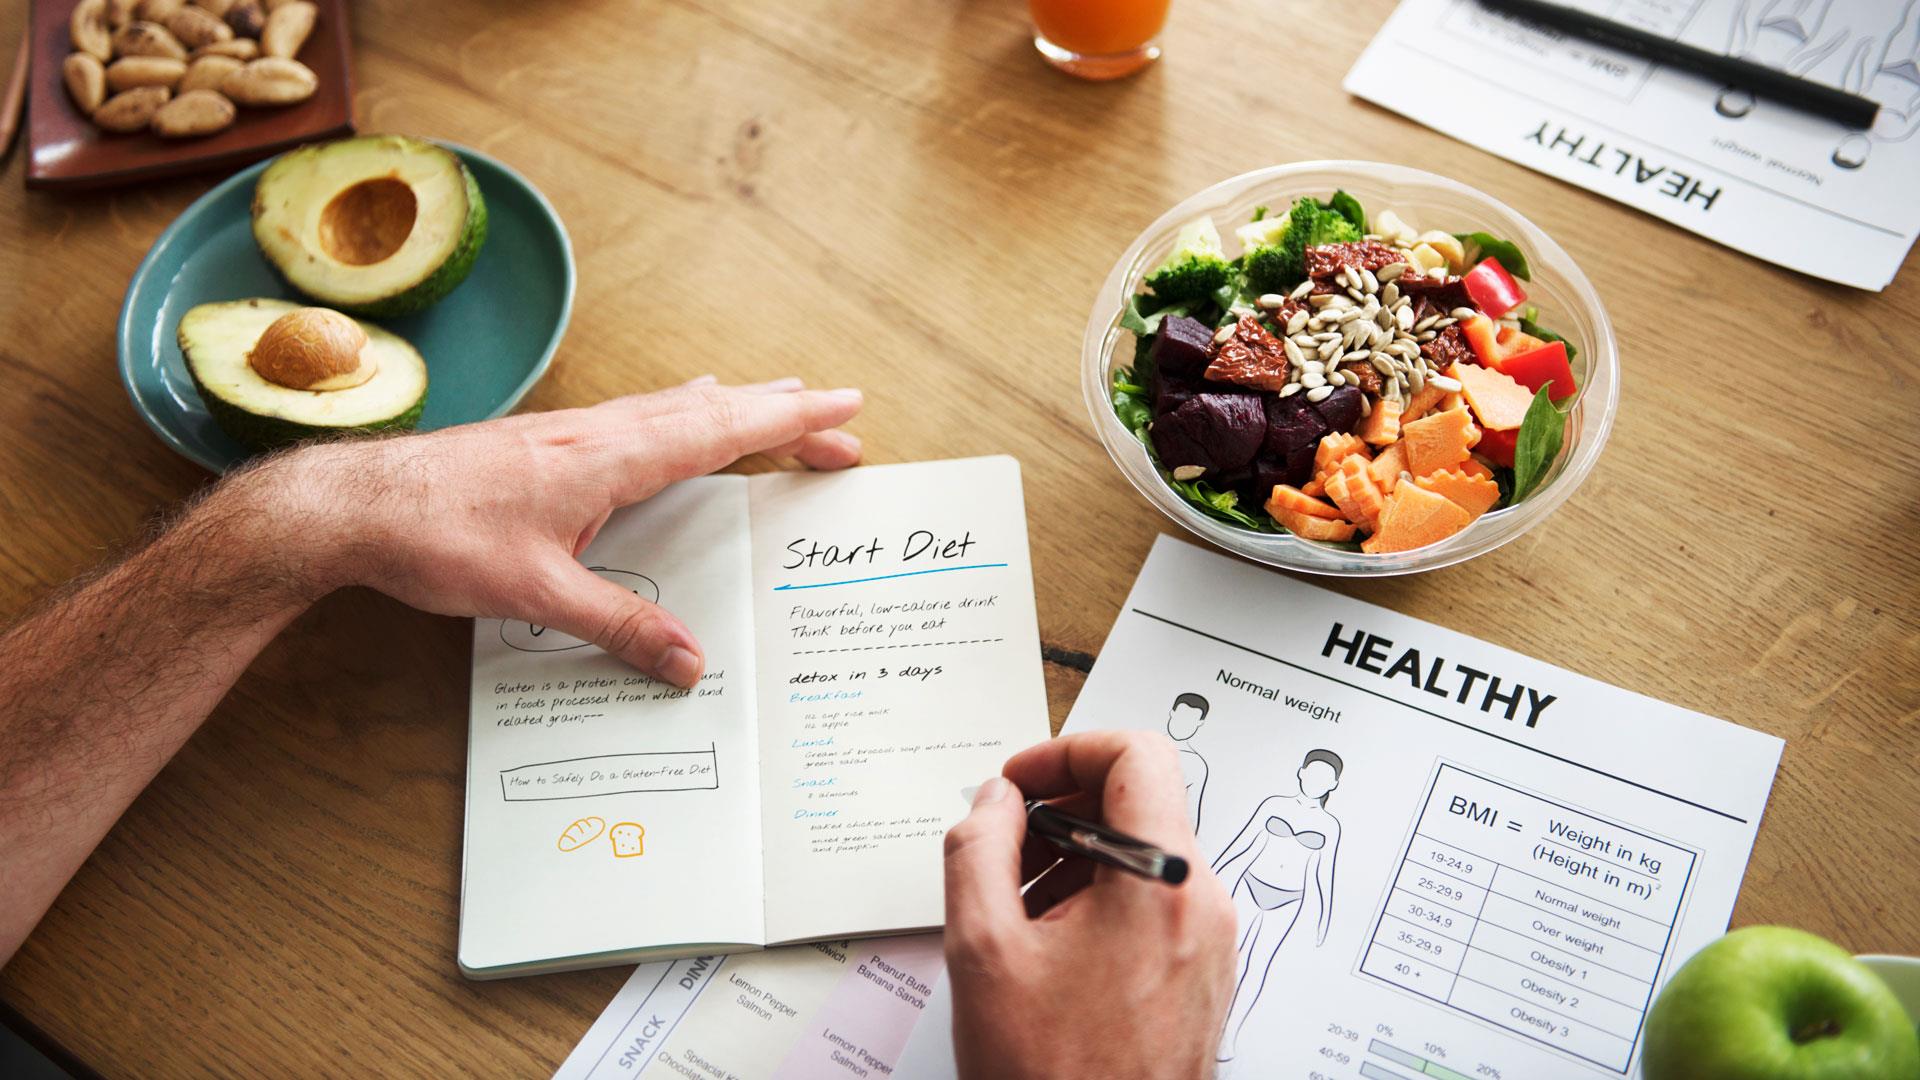 NYC Startup Noom Has Built The Weight Loss App that Helps to Tip